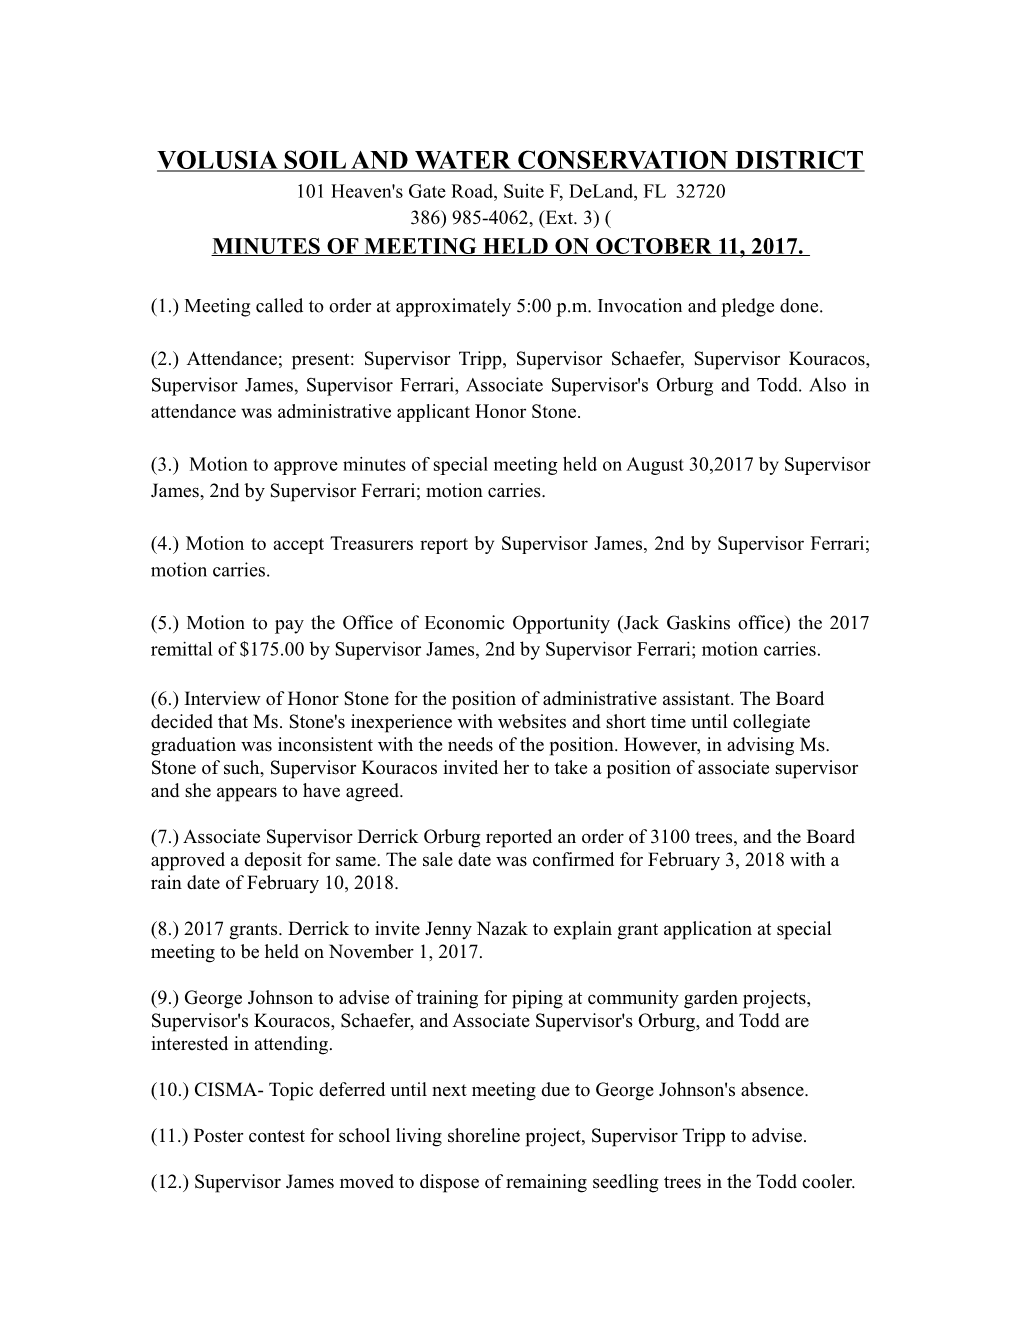 Volusia Soil and Water Conservation District